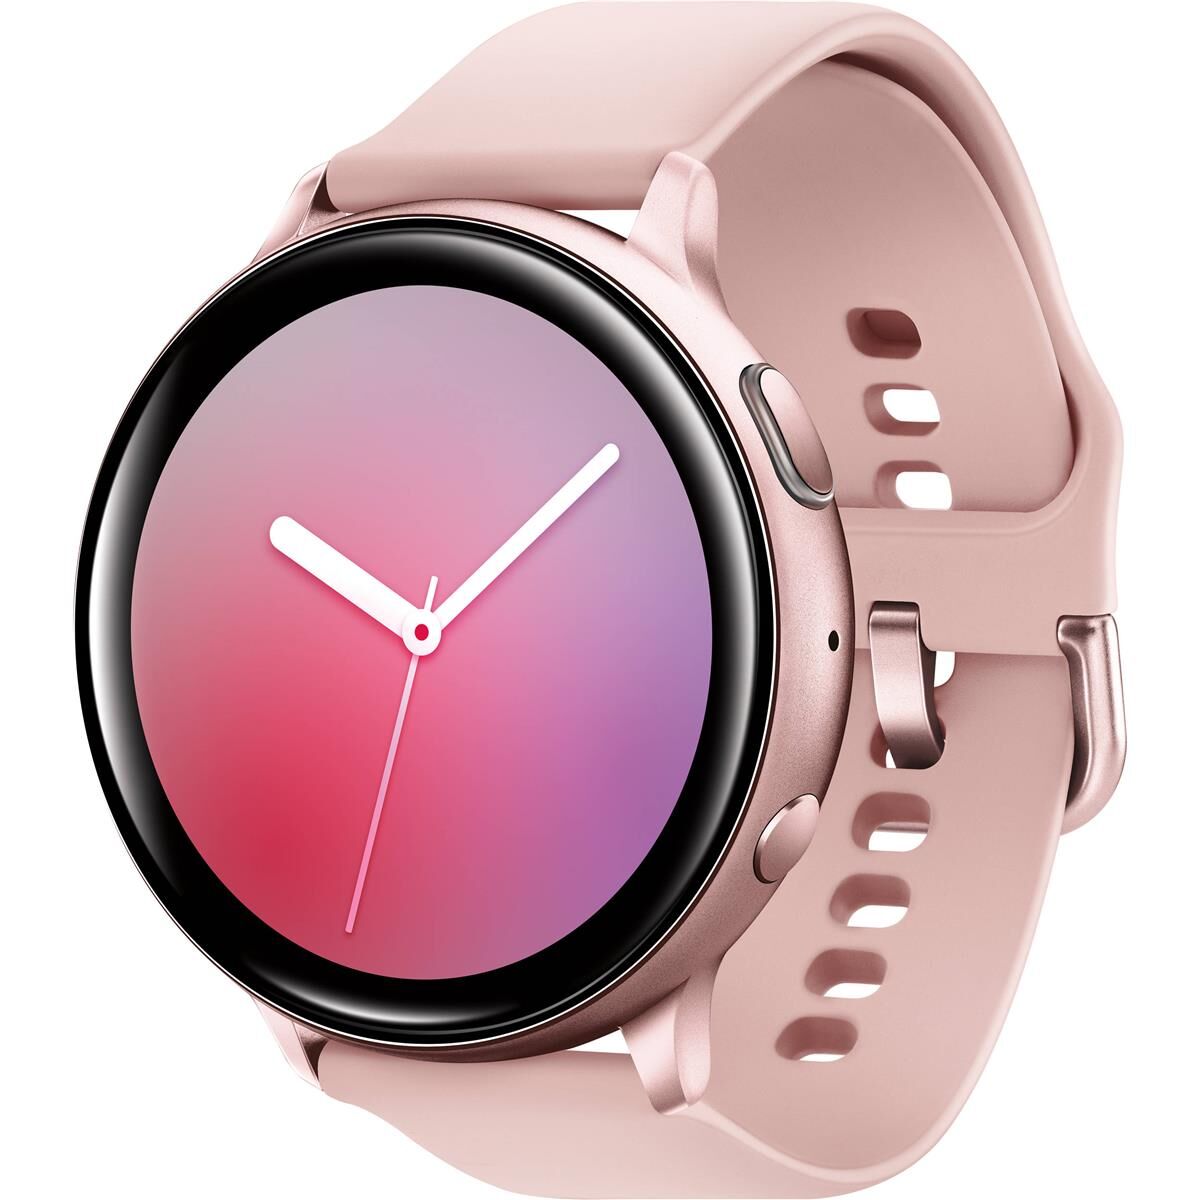 Samsung Galaxy Watch Active 2 with Bluetooth, 40mm, Pink Gold